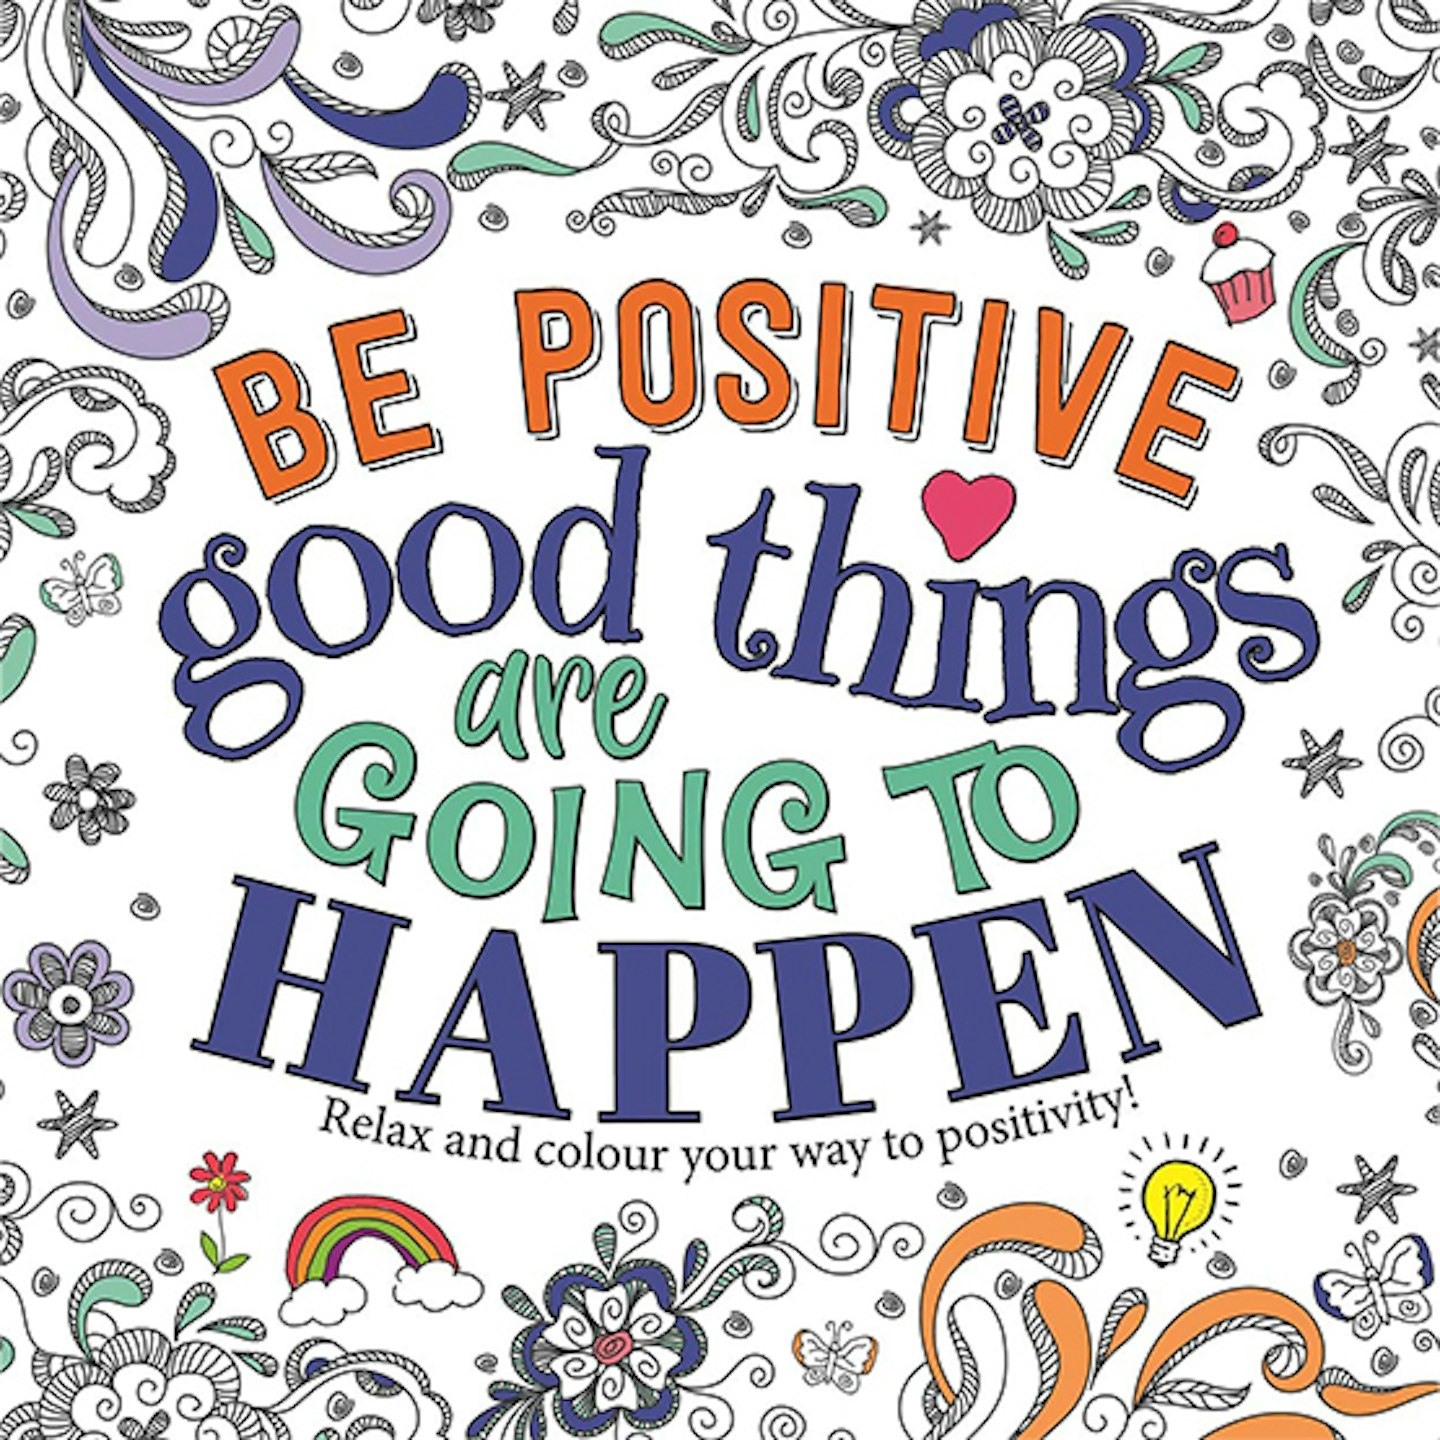 Be Positive- Good Things are Going to Happen book